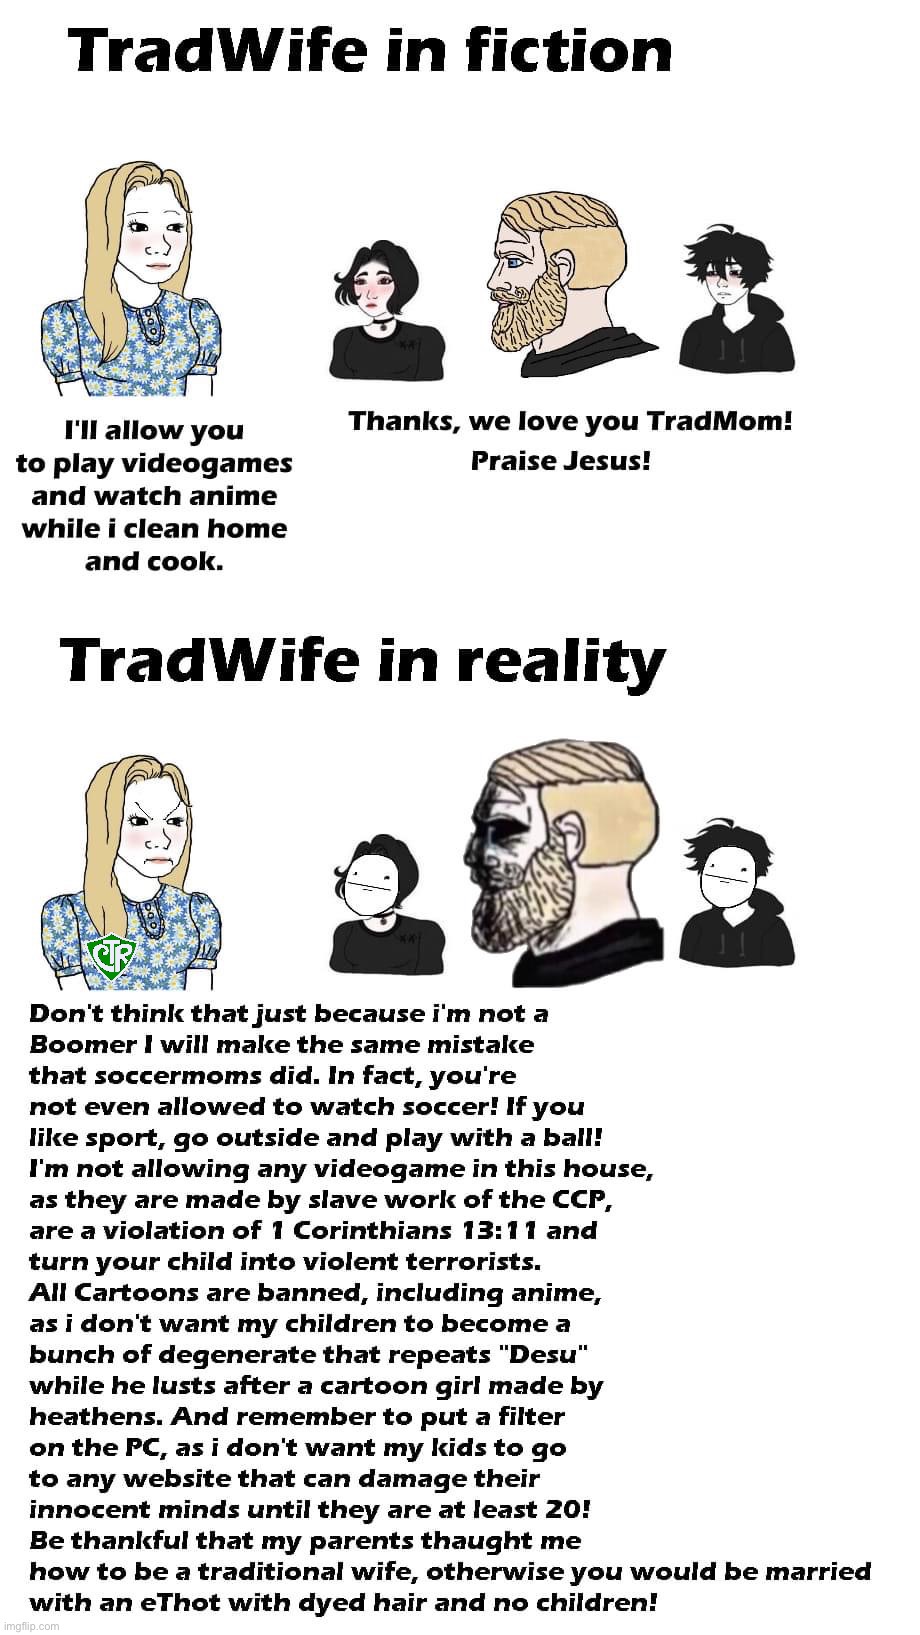 Vote CRT to make Imgflip a safer place for the children. | image tagged in tradwife fiction vs reality,vote,crt,think of the children,online safety,tradwife | made w/ Imgflip meme maker